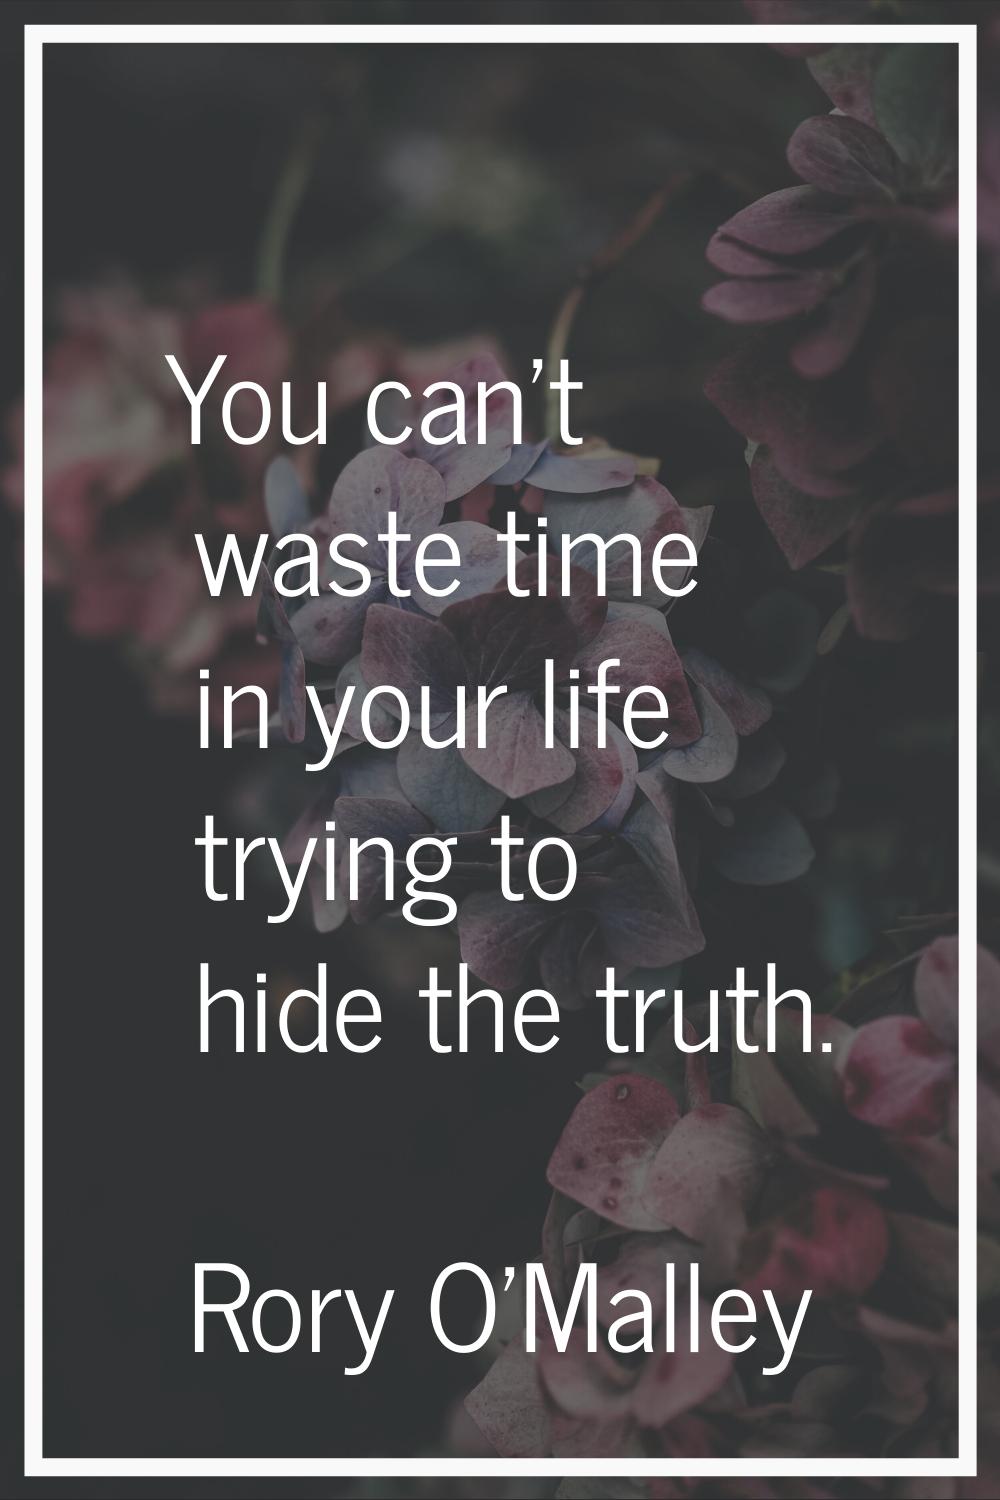 You can't waste time in your life trying to hide the truth.